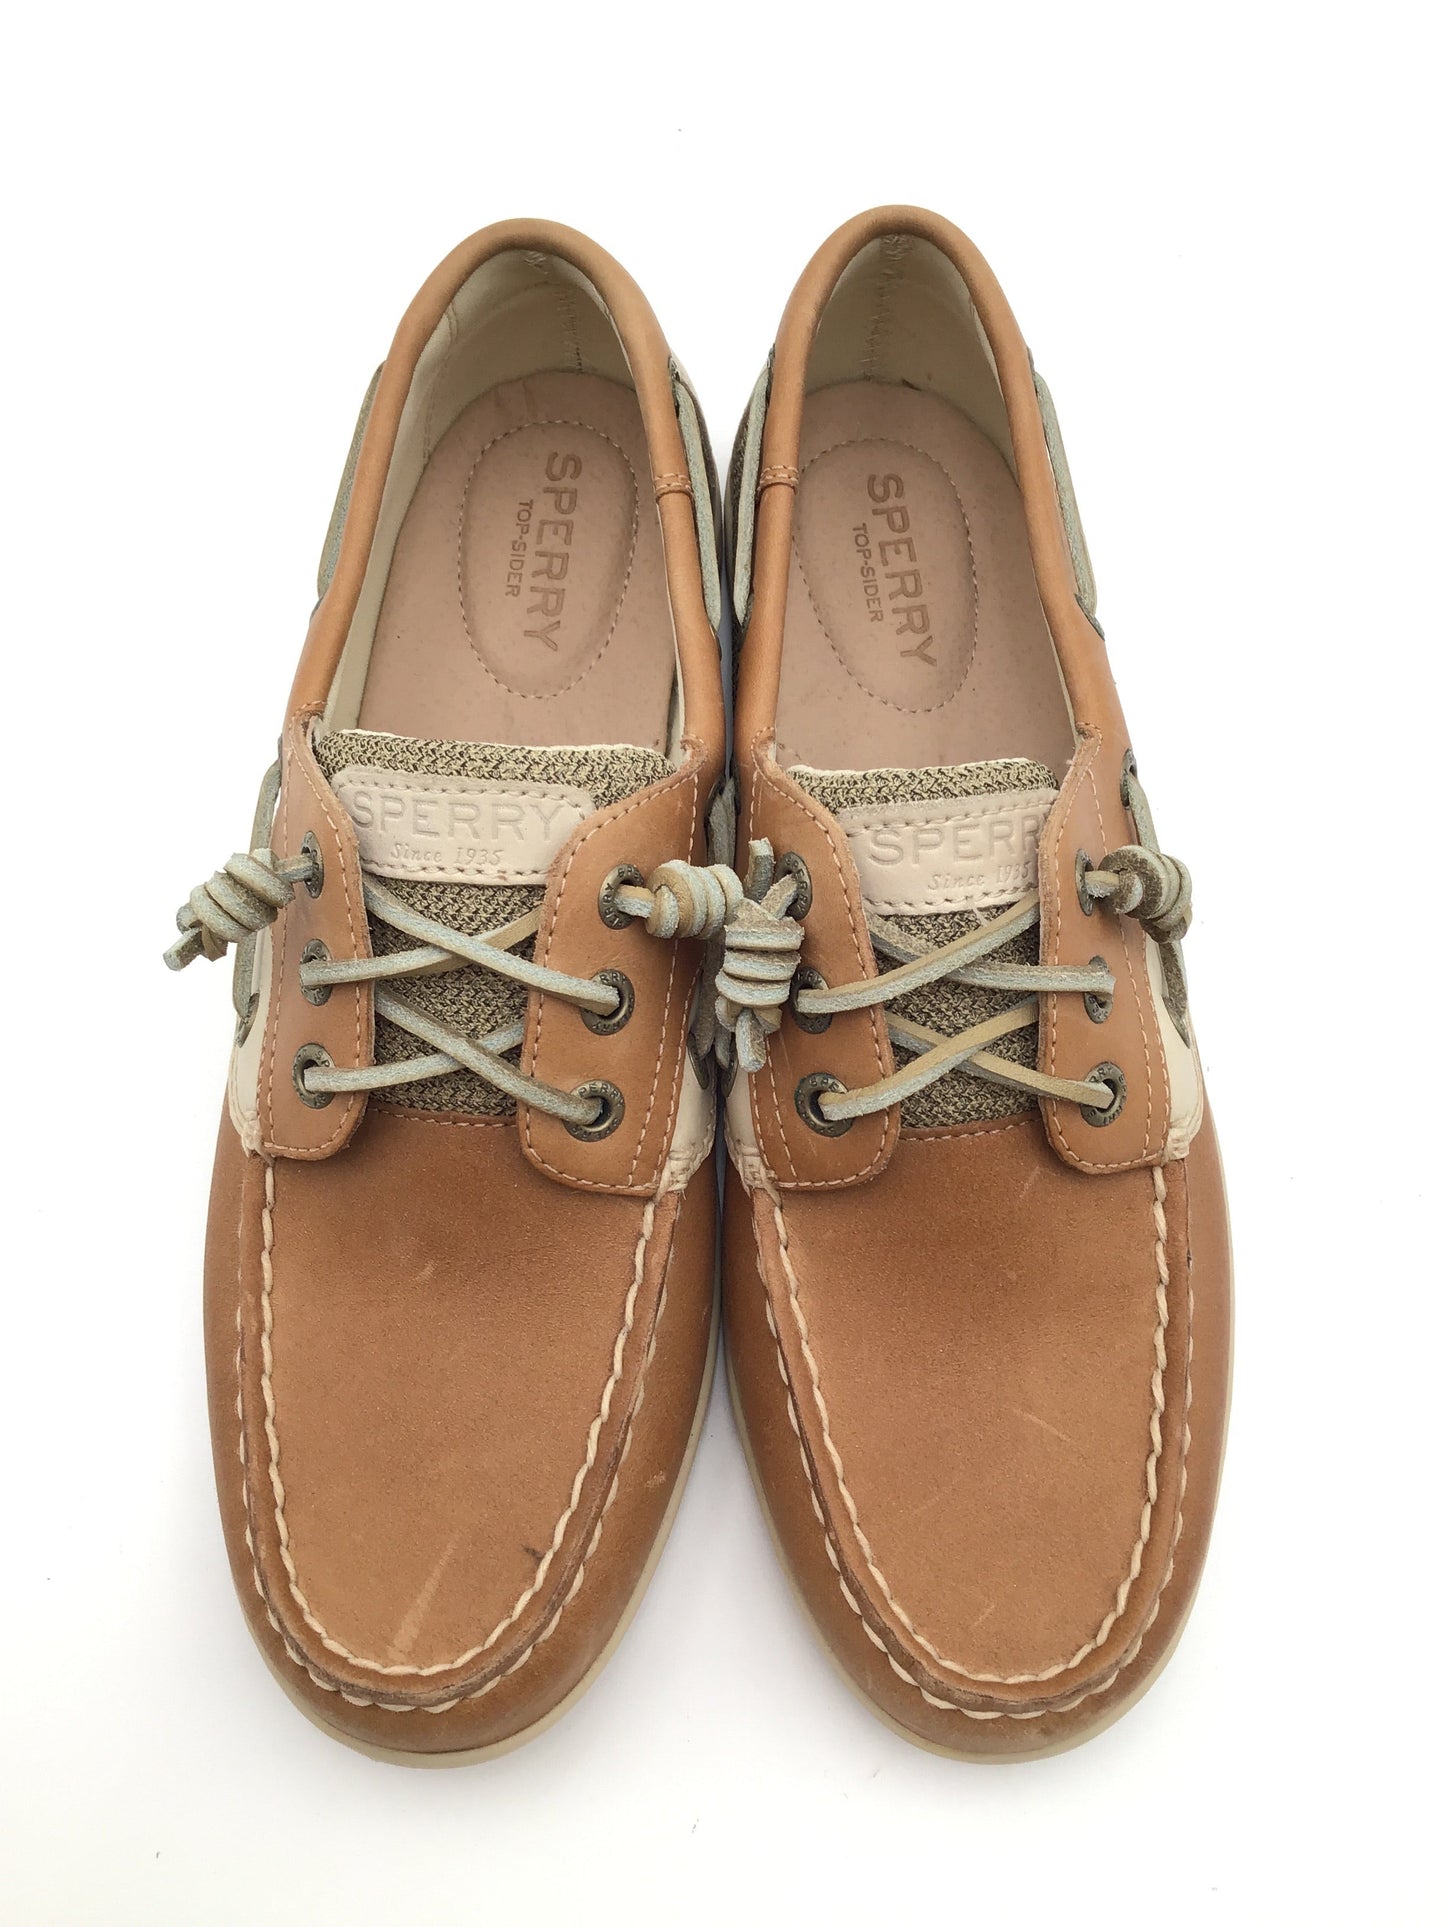 Tan Shoes Flats Sperry, Size 8